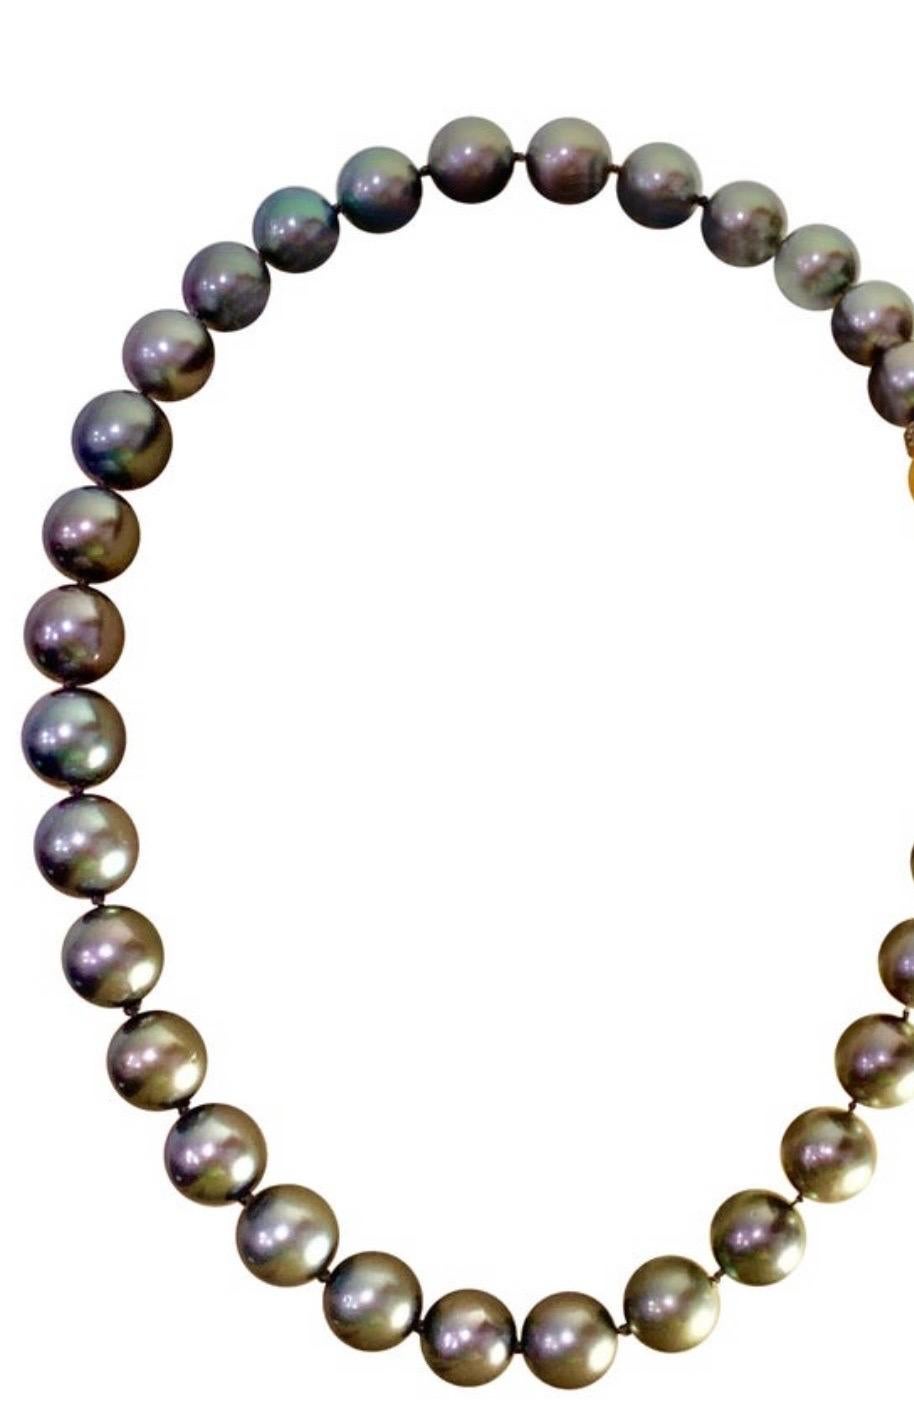 11-15 mm Tahitian Black Graduating Pearls Strand Necklace, Estate, WG For Sale 6